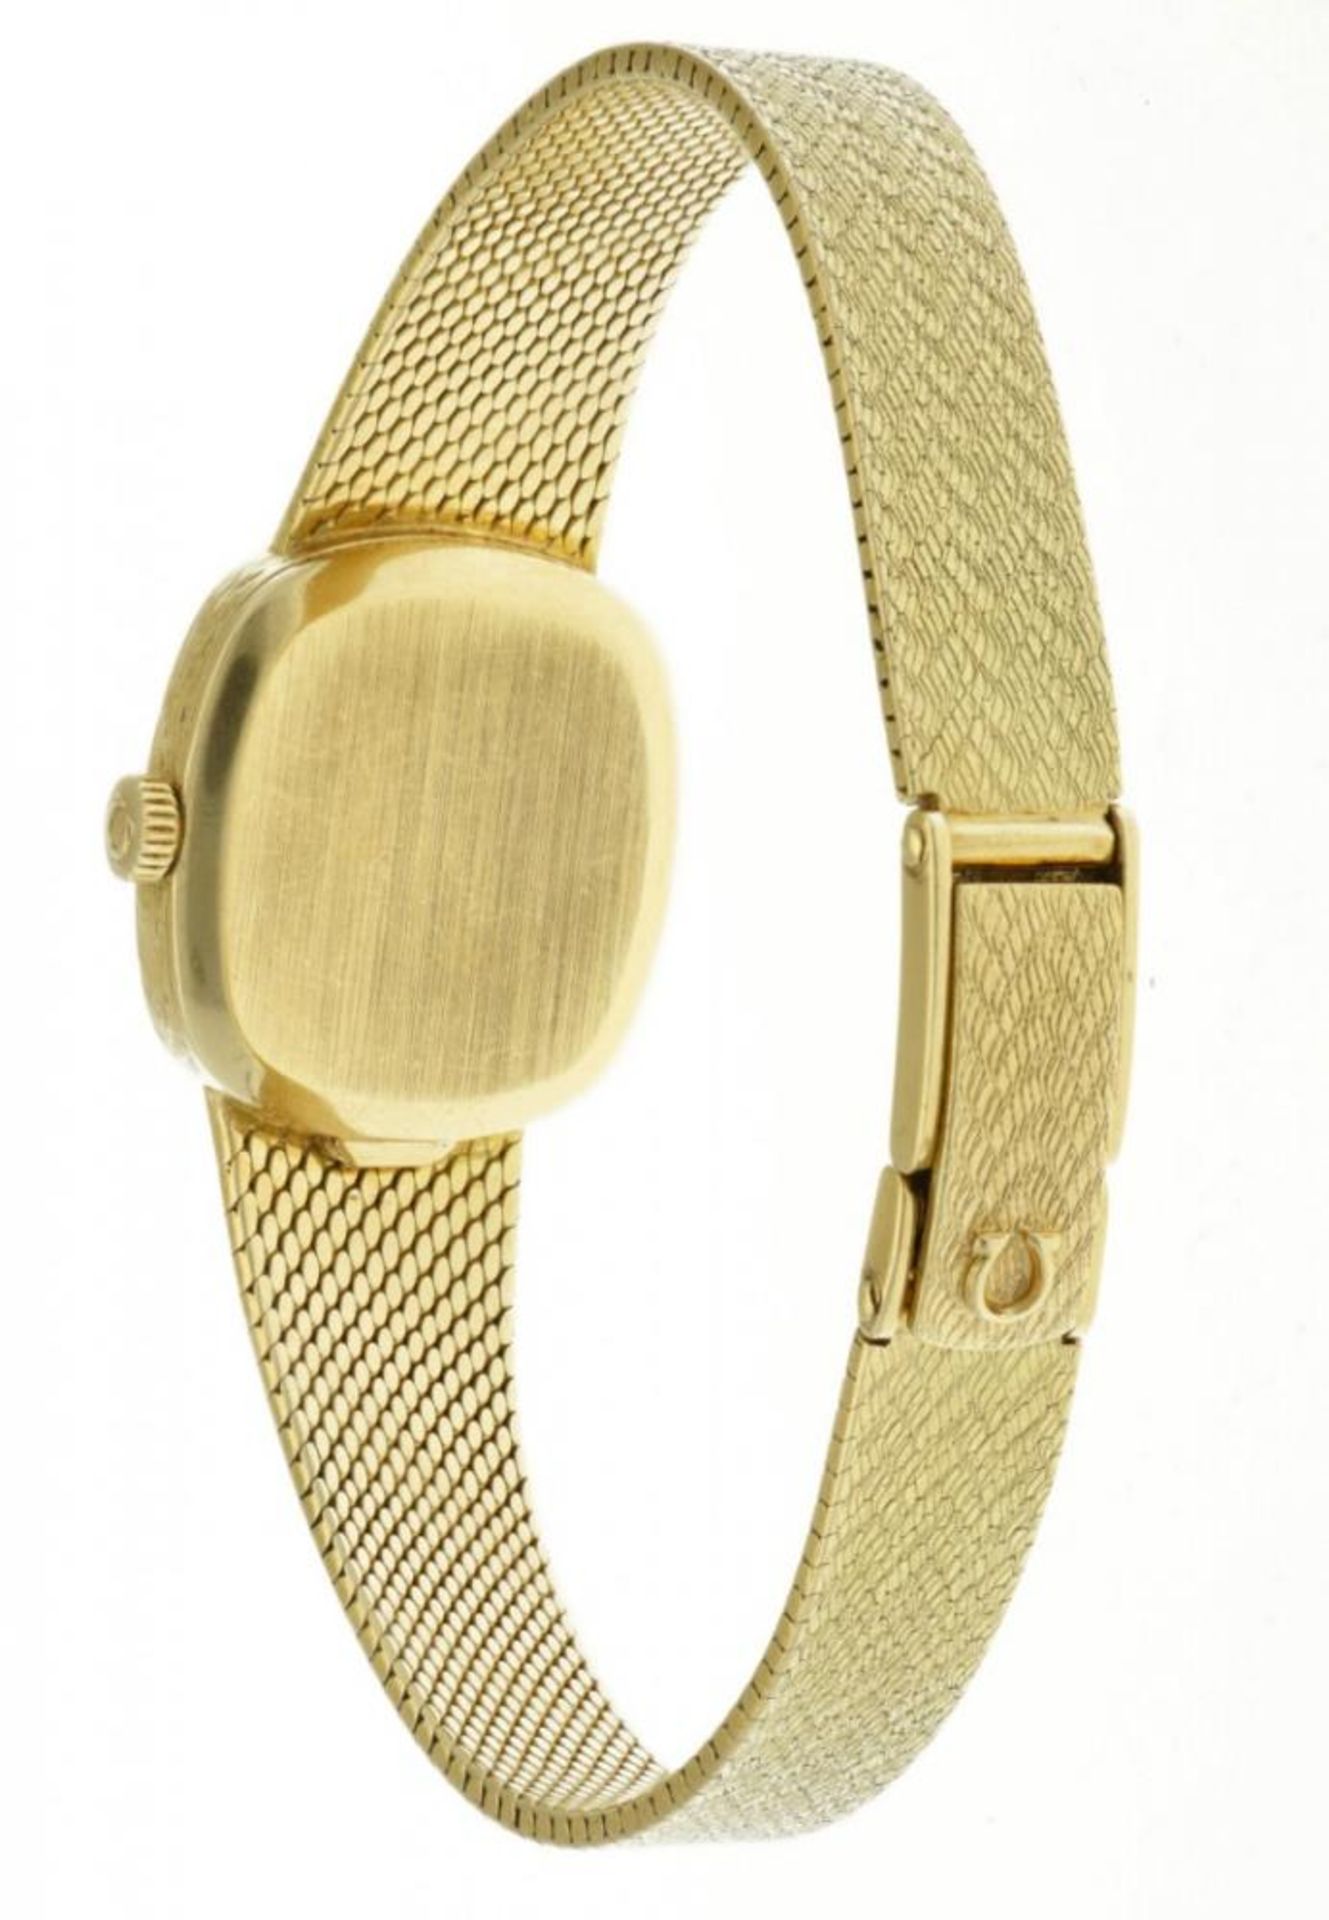 Omega full gold 511.8805 - Ladies Watch - appr. 1977. - Image 3 of 6